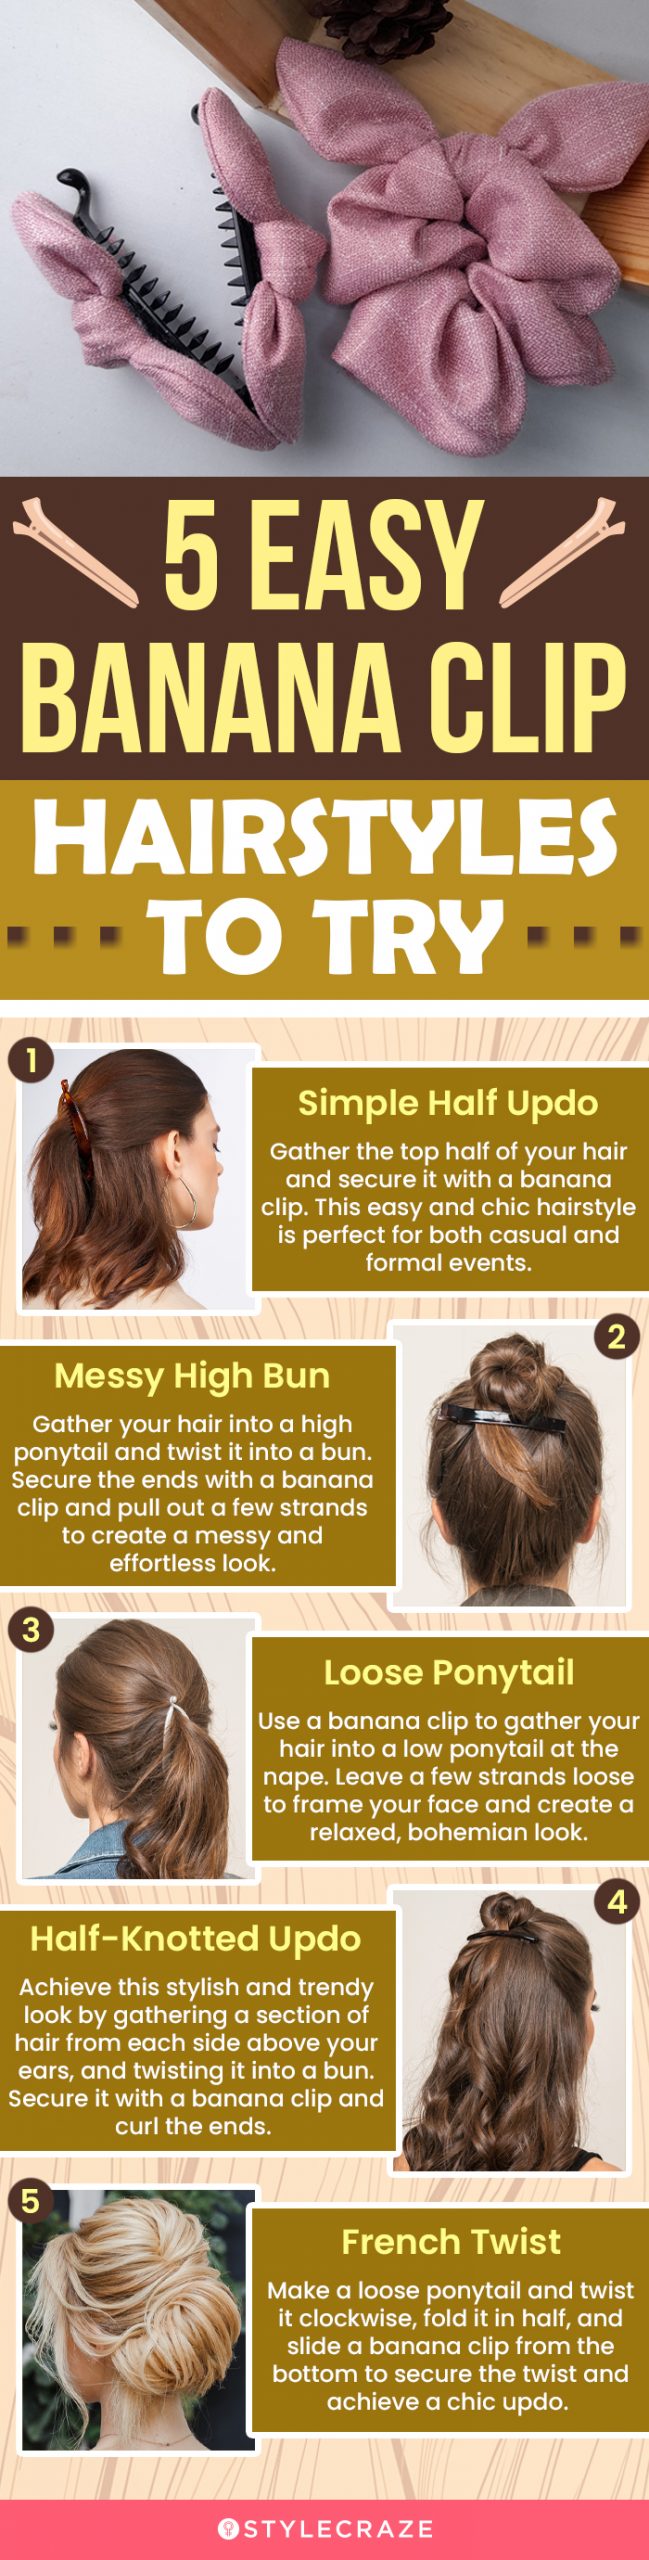 6 Easy Summer Hairstyles to Stay Cool | Natalie Yerger